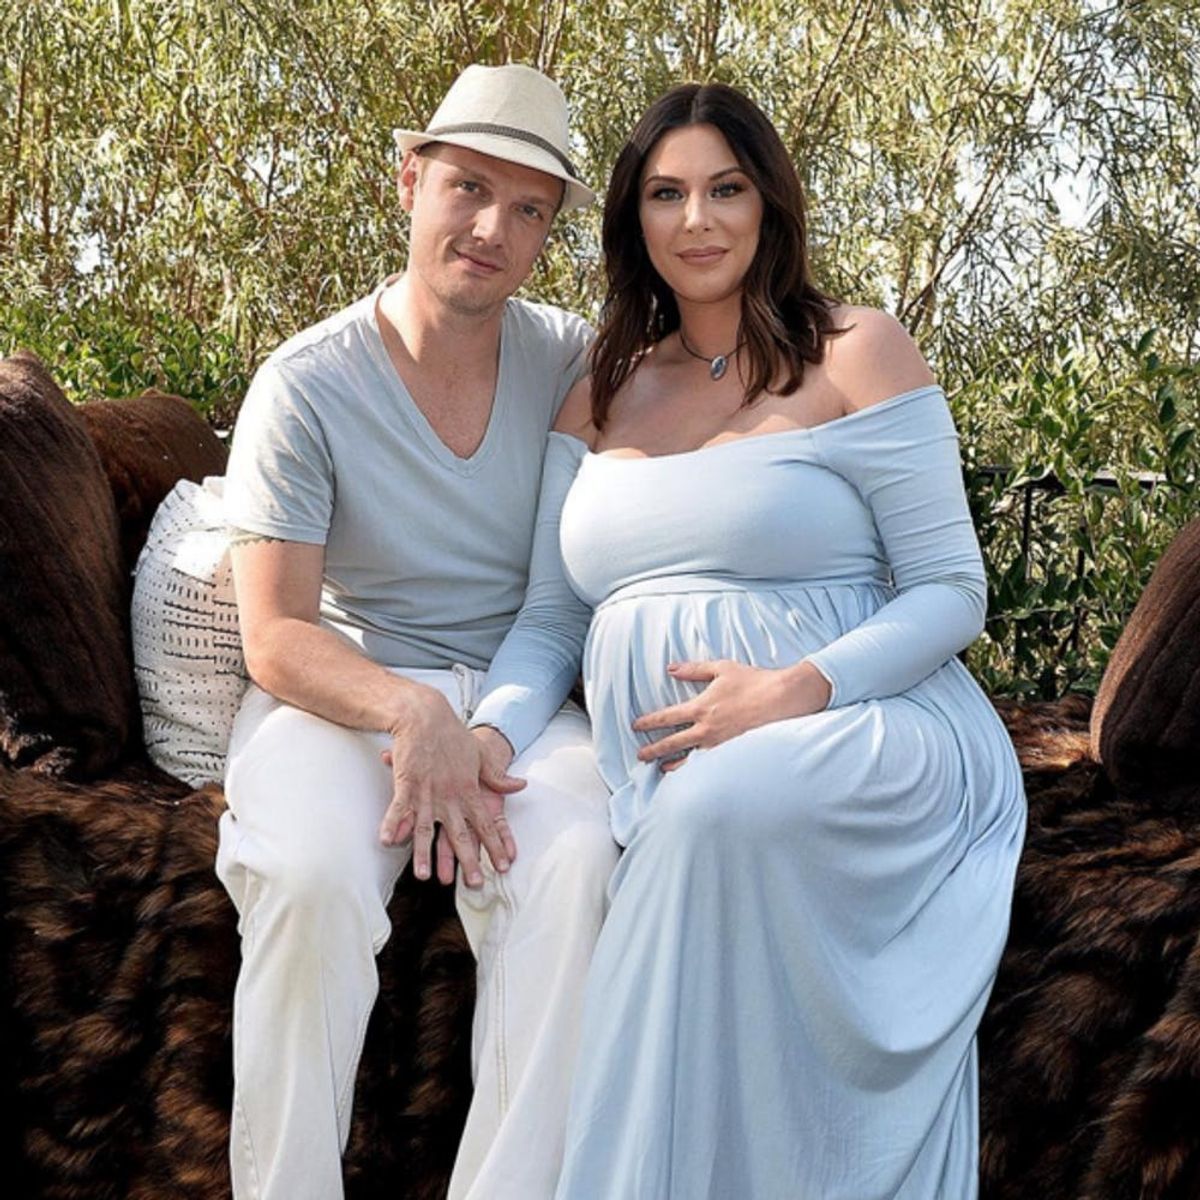 Nick Carter and His Wife Welcome Their Baby (Backstreet) Boy